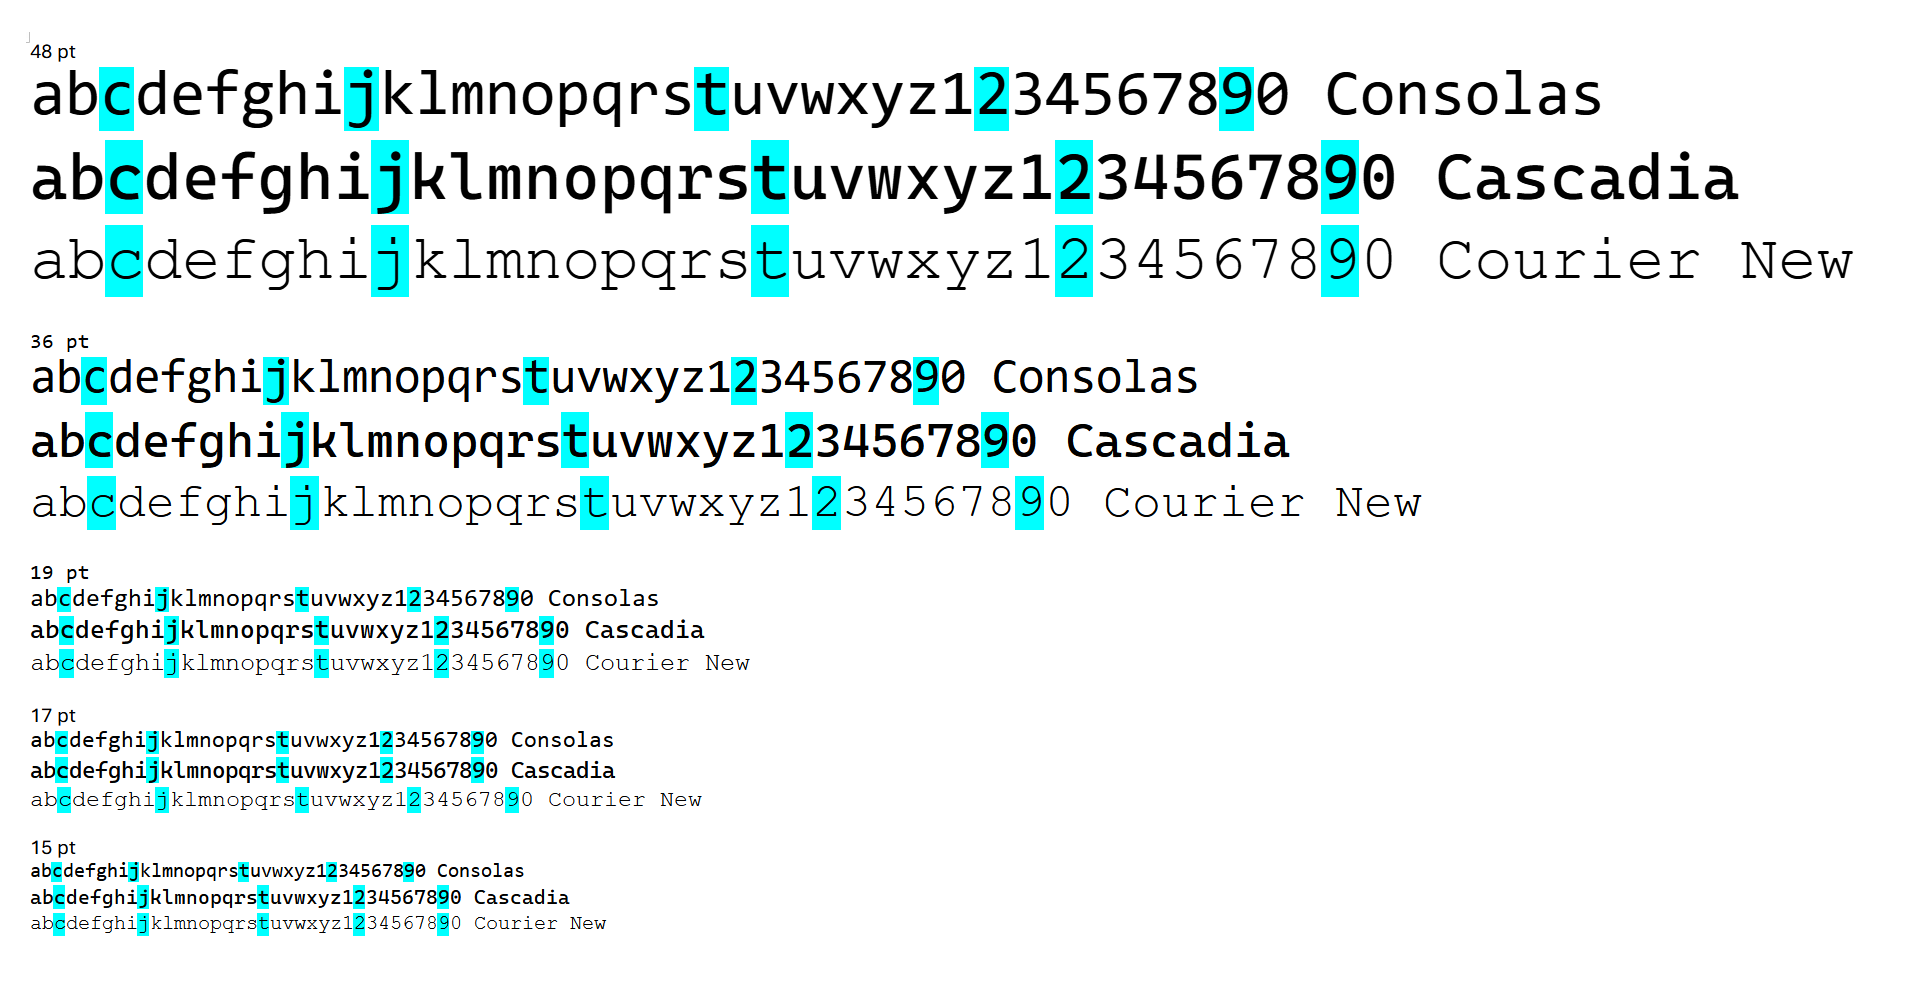 Consolas, Cascadia, and Courier New typefaces